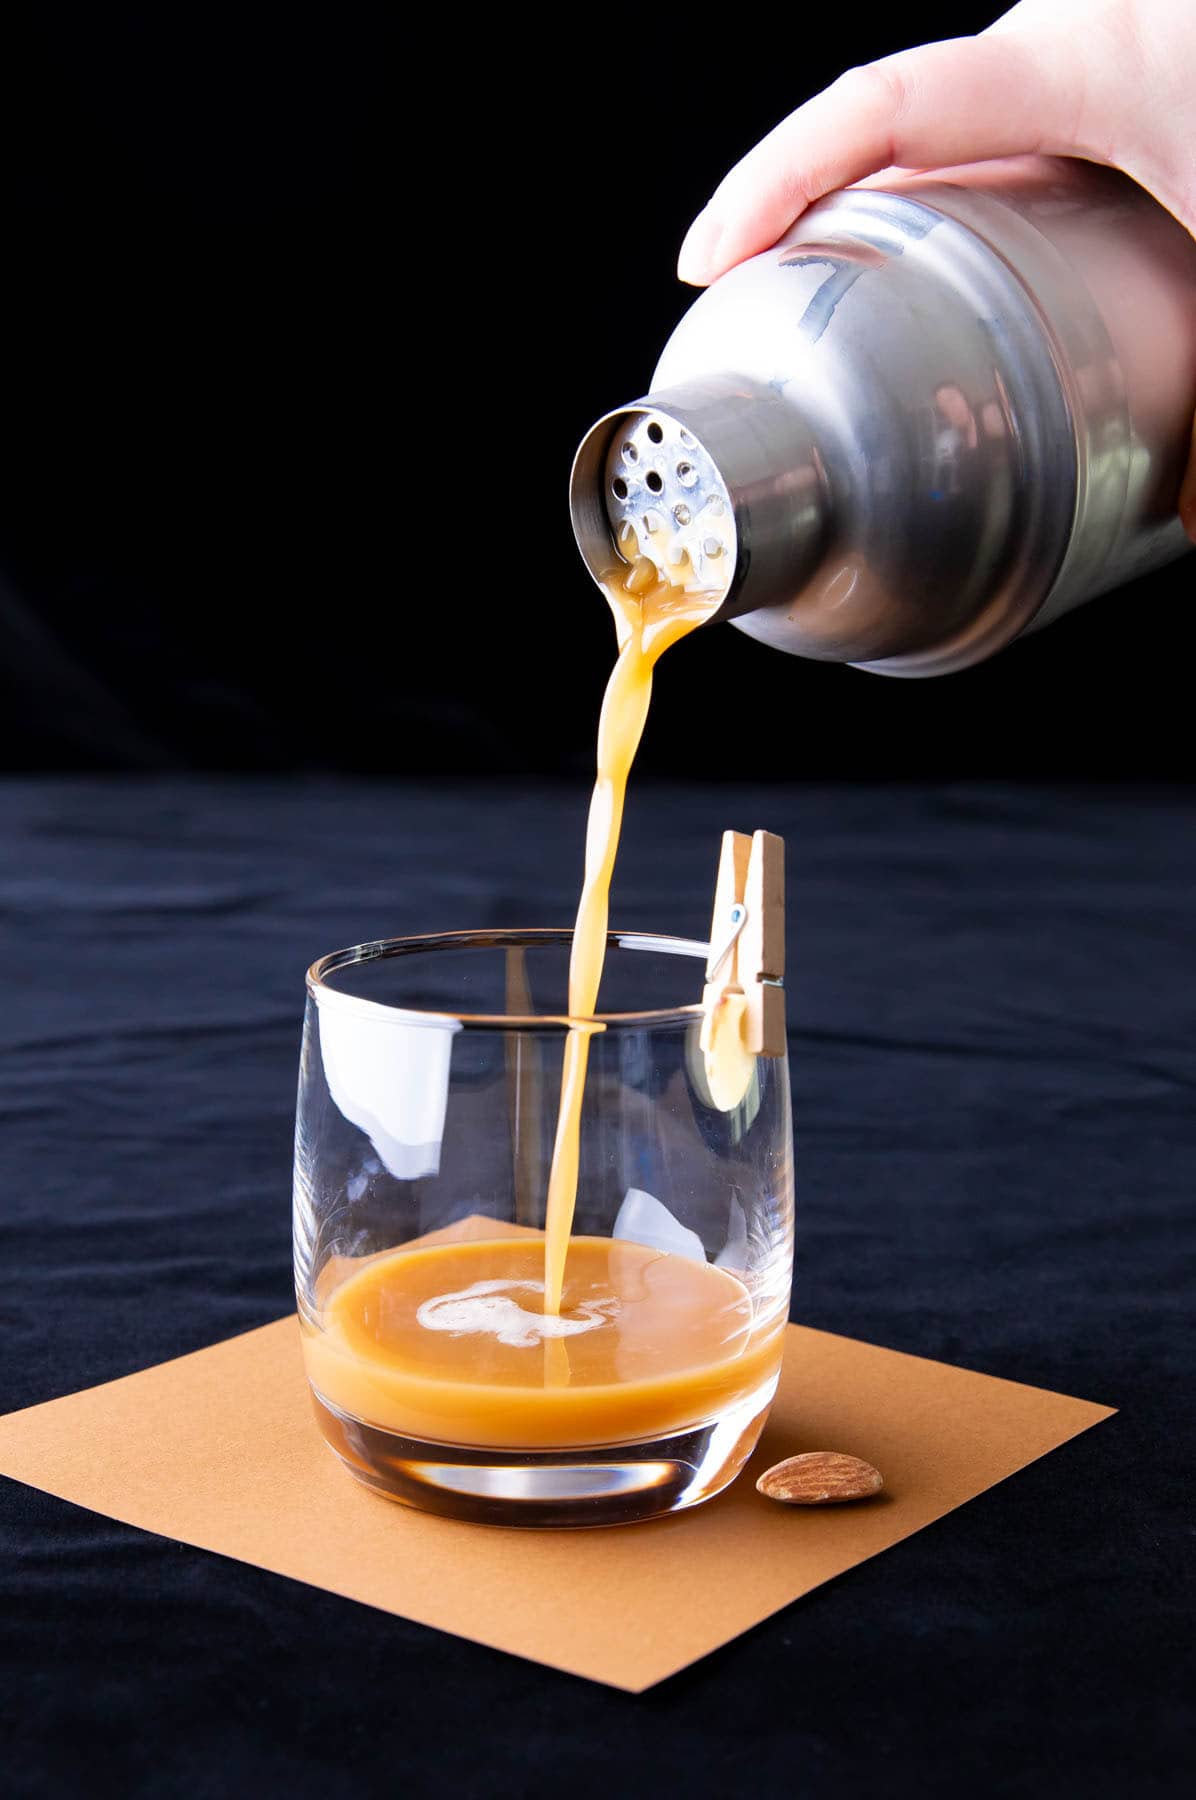 A photo showing how to make a Toasted Almond Drink – straining the cocktail mixture from a cocktail shaker